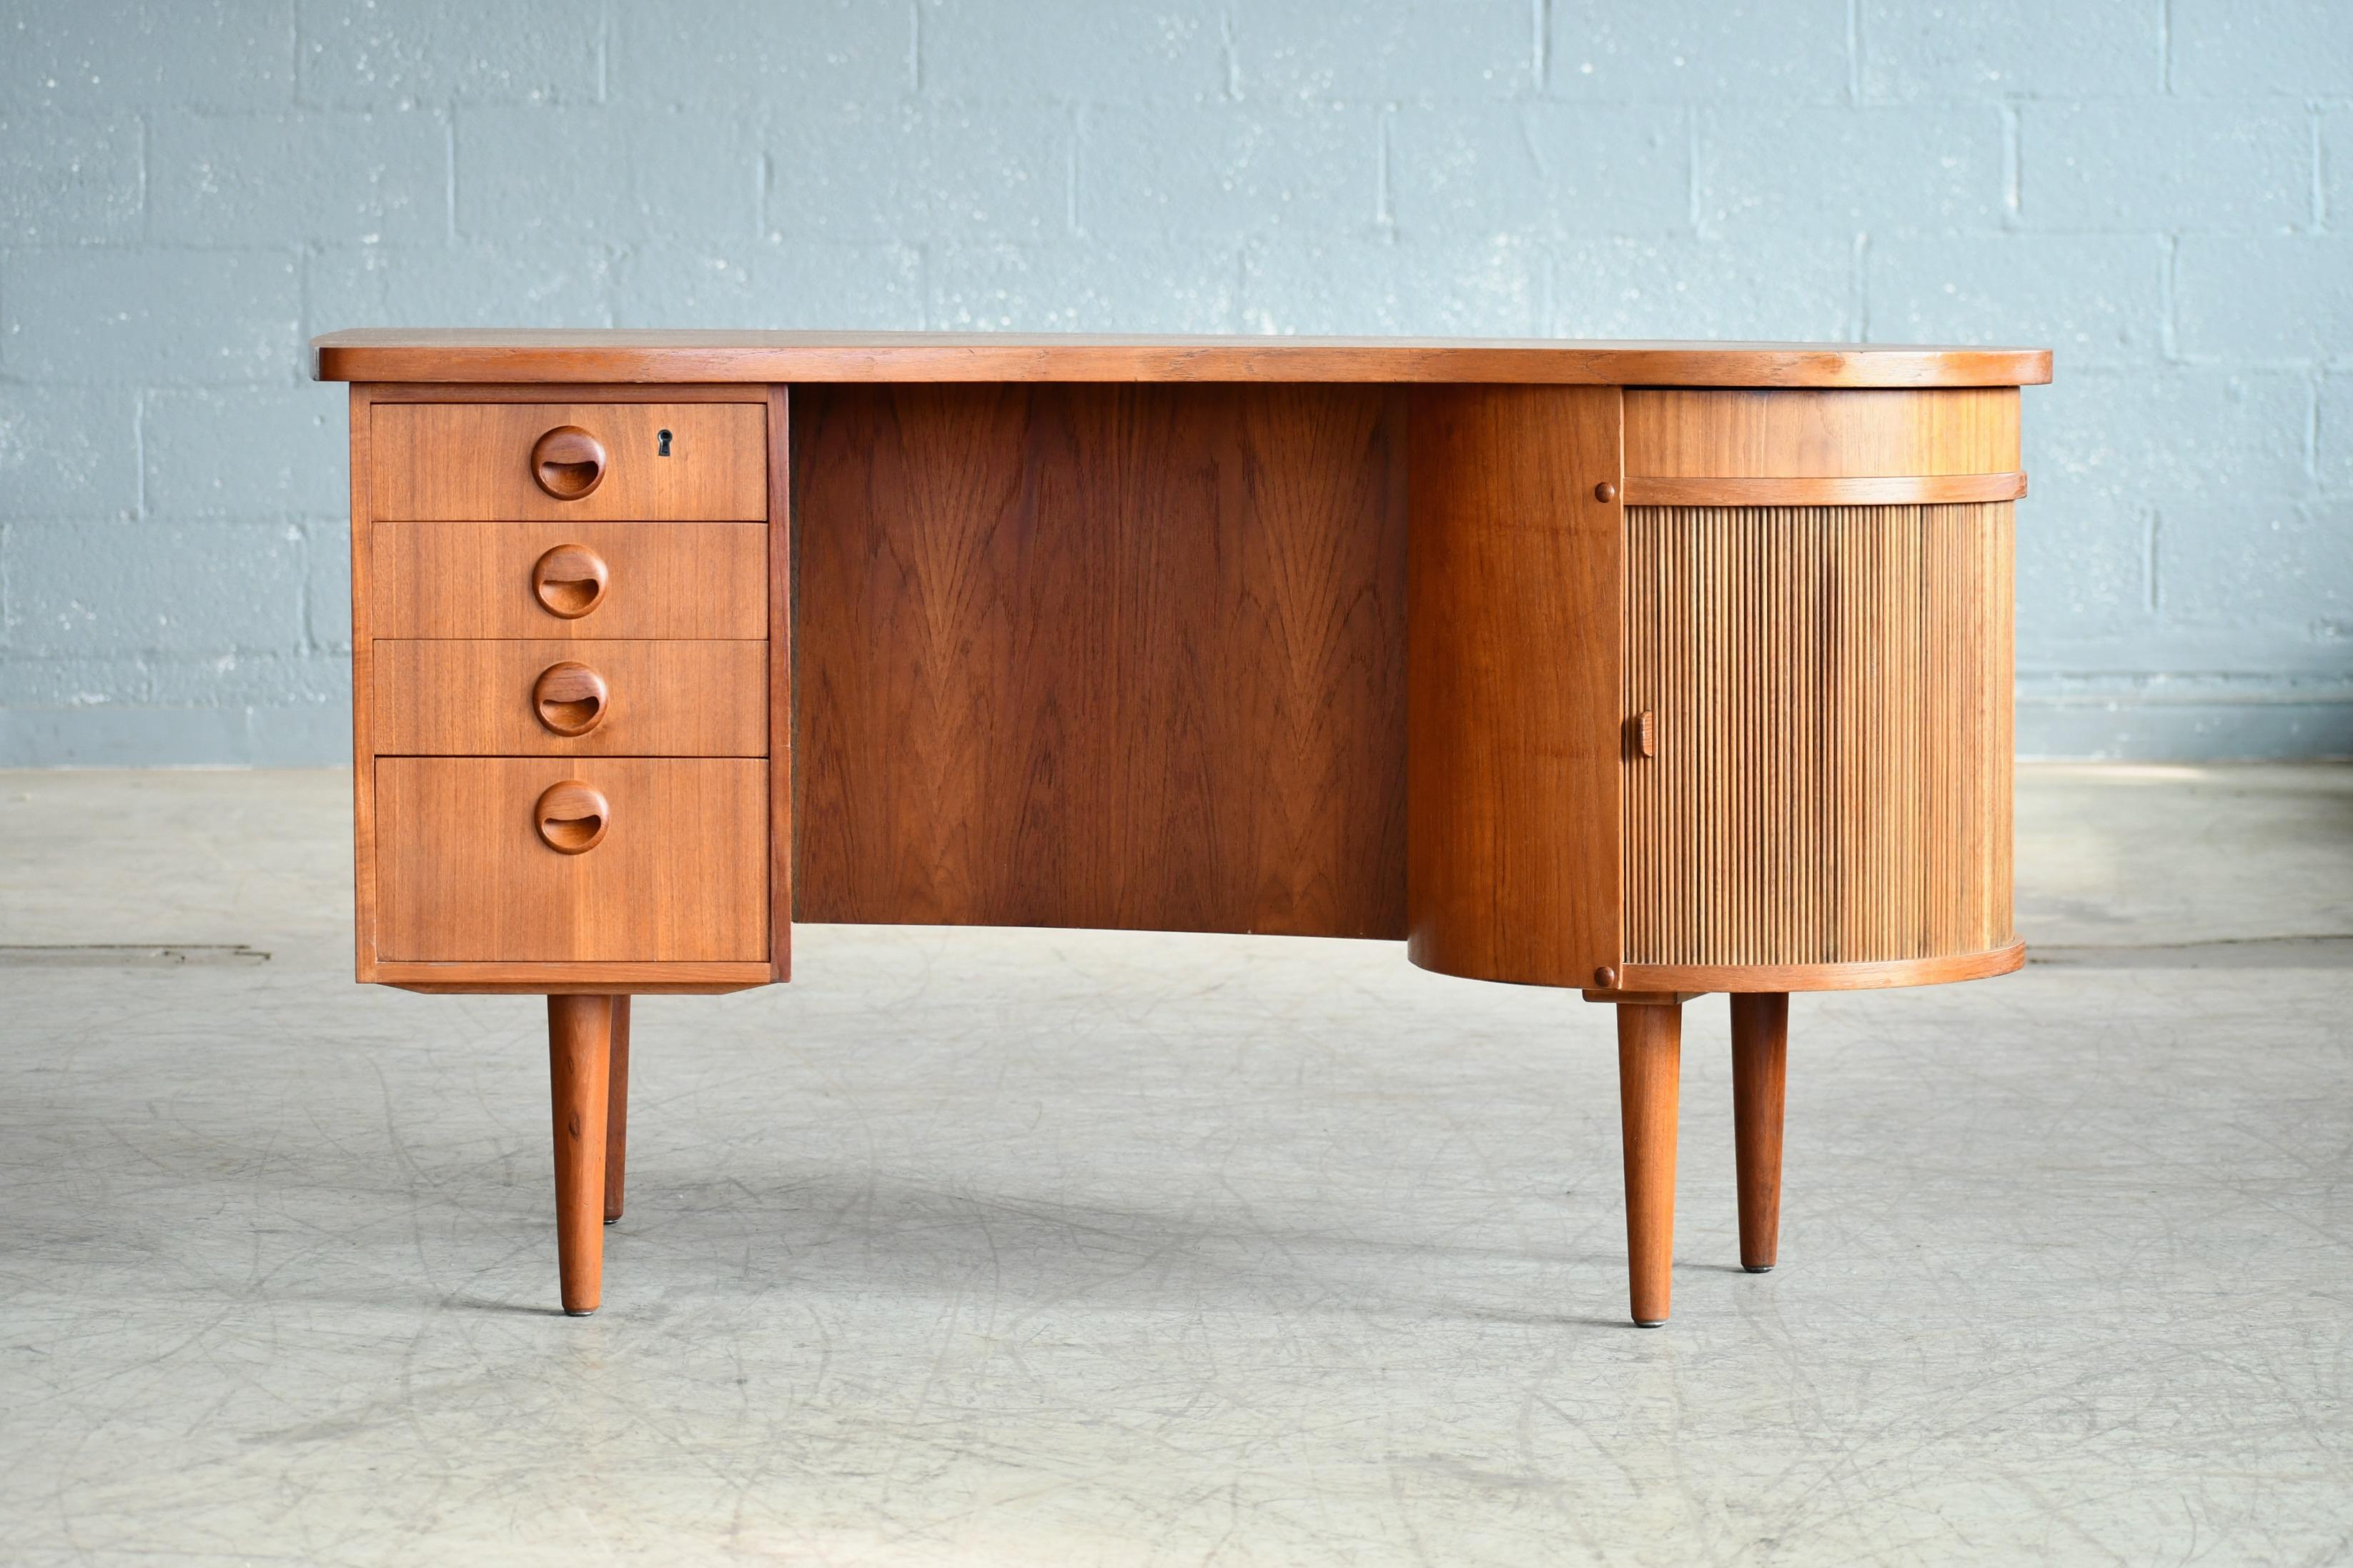 Beautiful Danish medium size executive desk in teak attributed to Kai Kristiansen and made in Denmark in the 1950s. Very organic kidney-shaped design of the top and nice carved pulls in solid teak. Versatile size fitting well into urban homes and